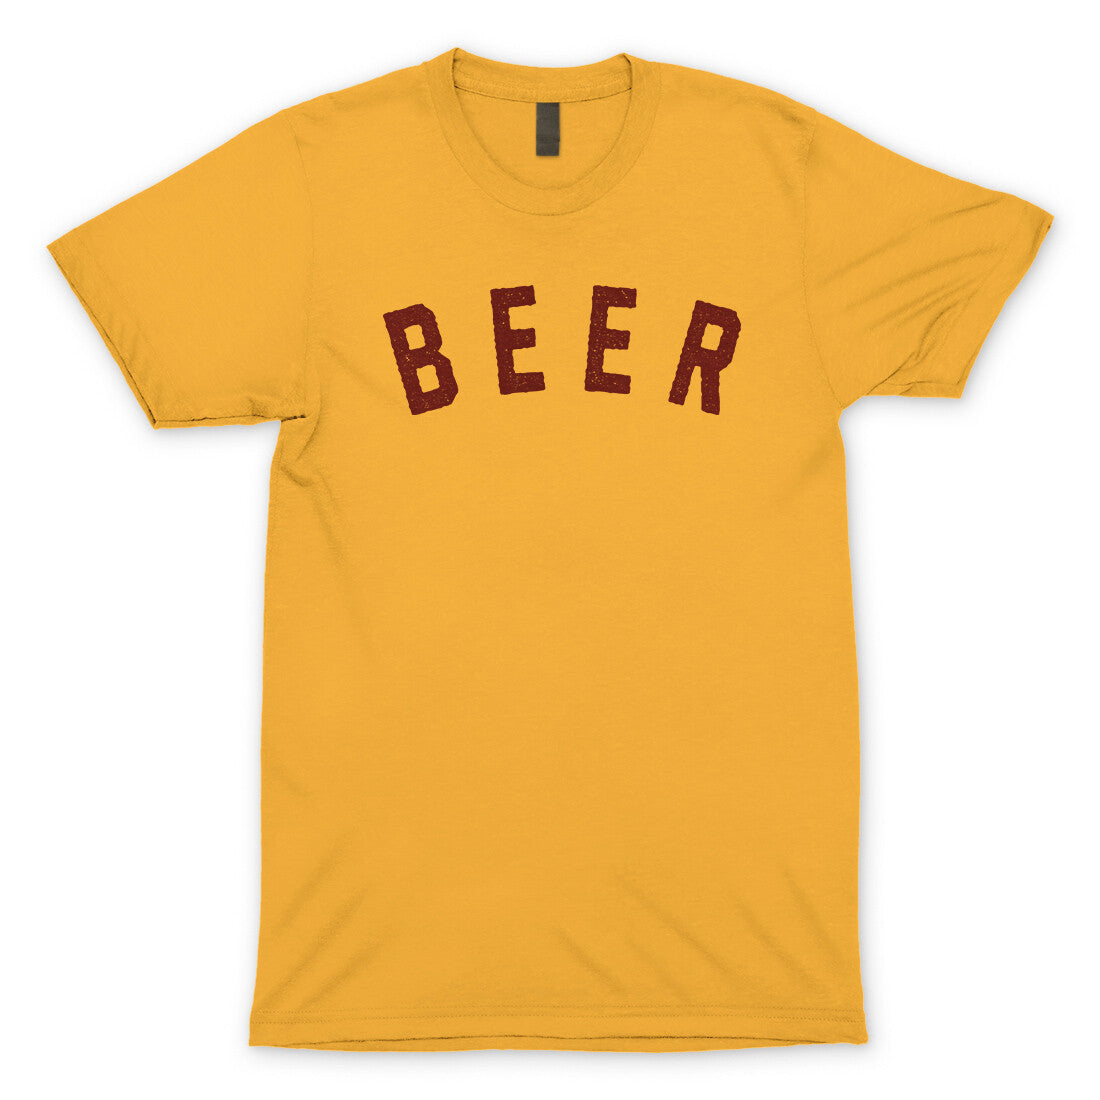 Beer in Gold Color